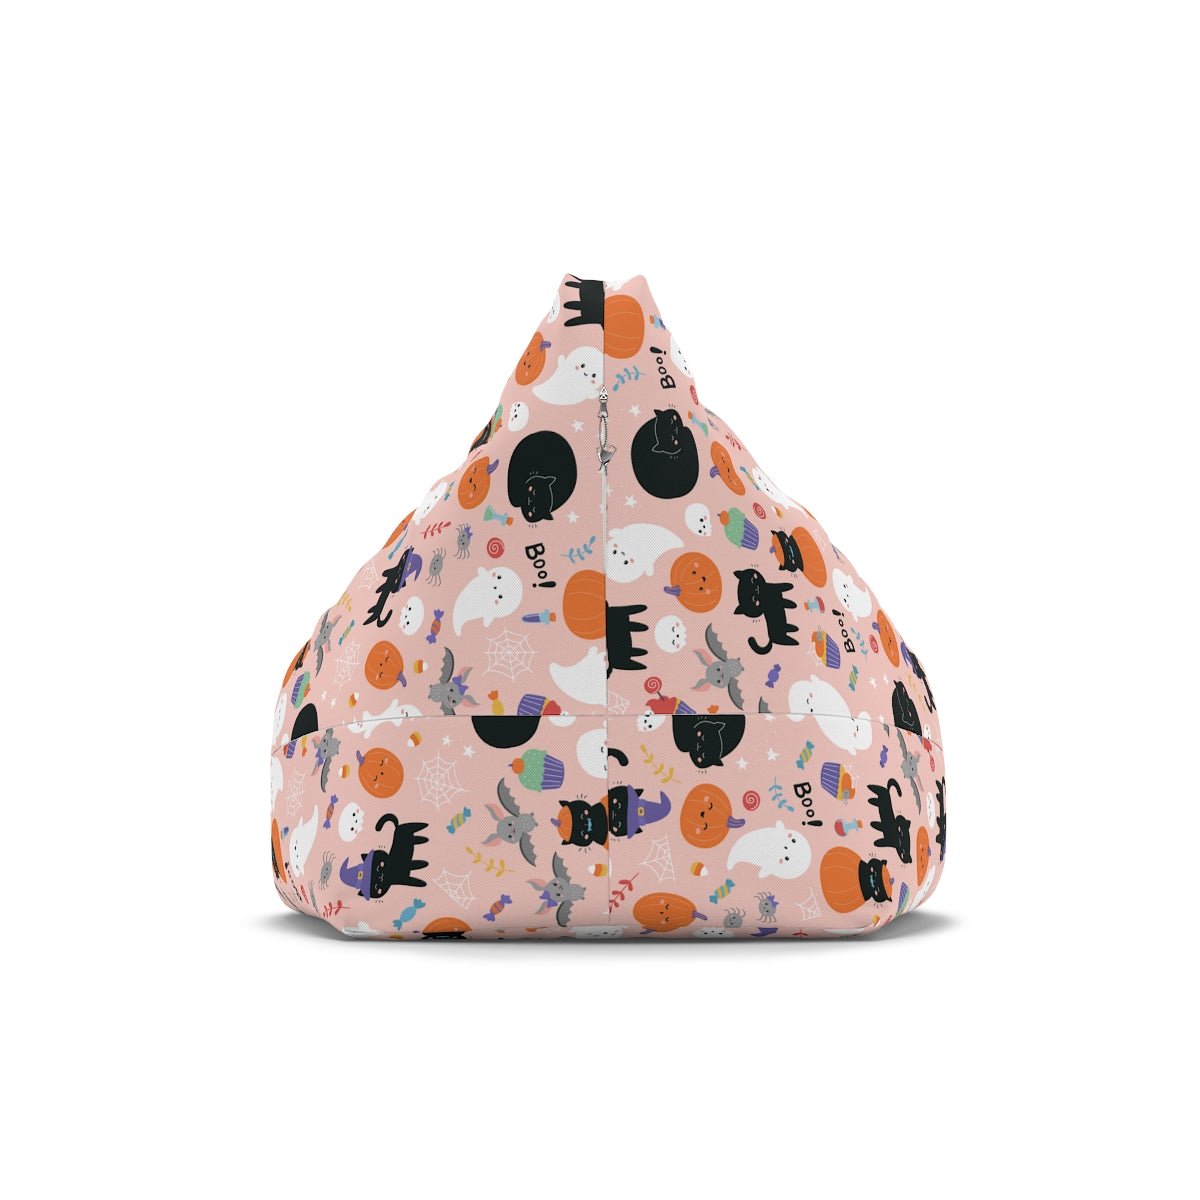 Halloween Ghosts and Black Cats Bean Bag Chair Cover - Puffin Lime